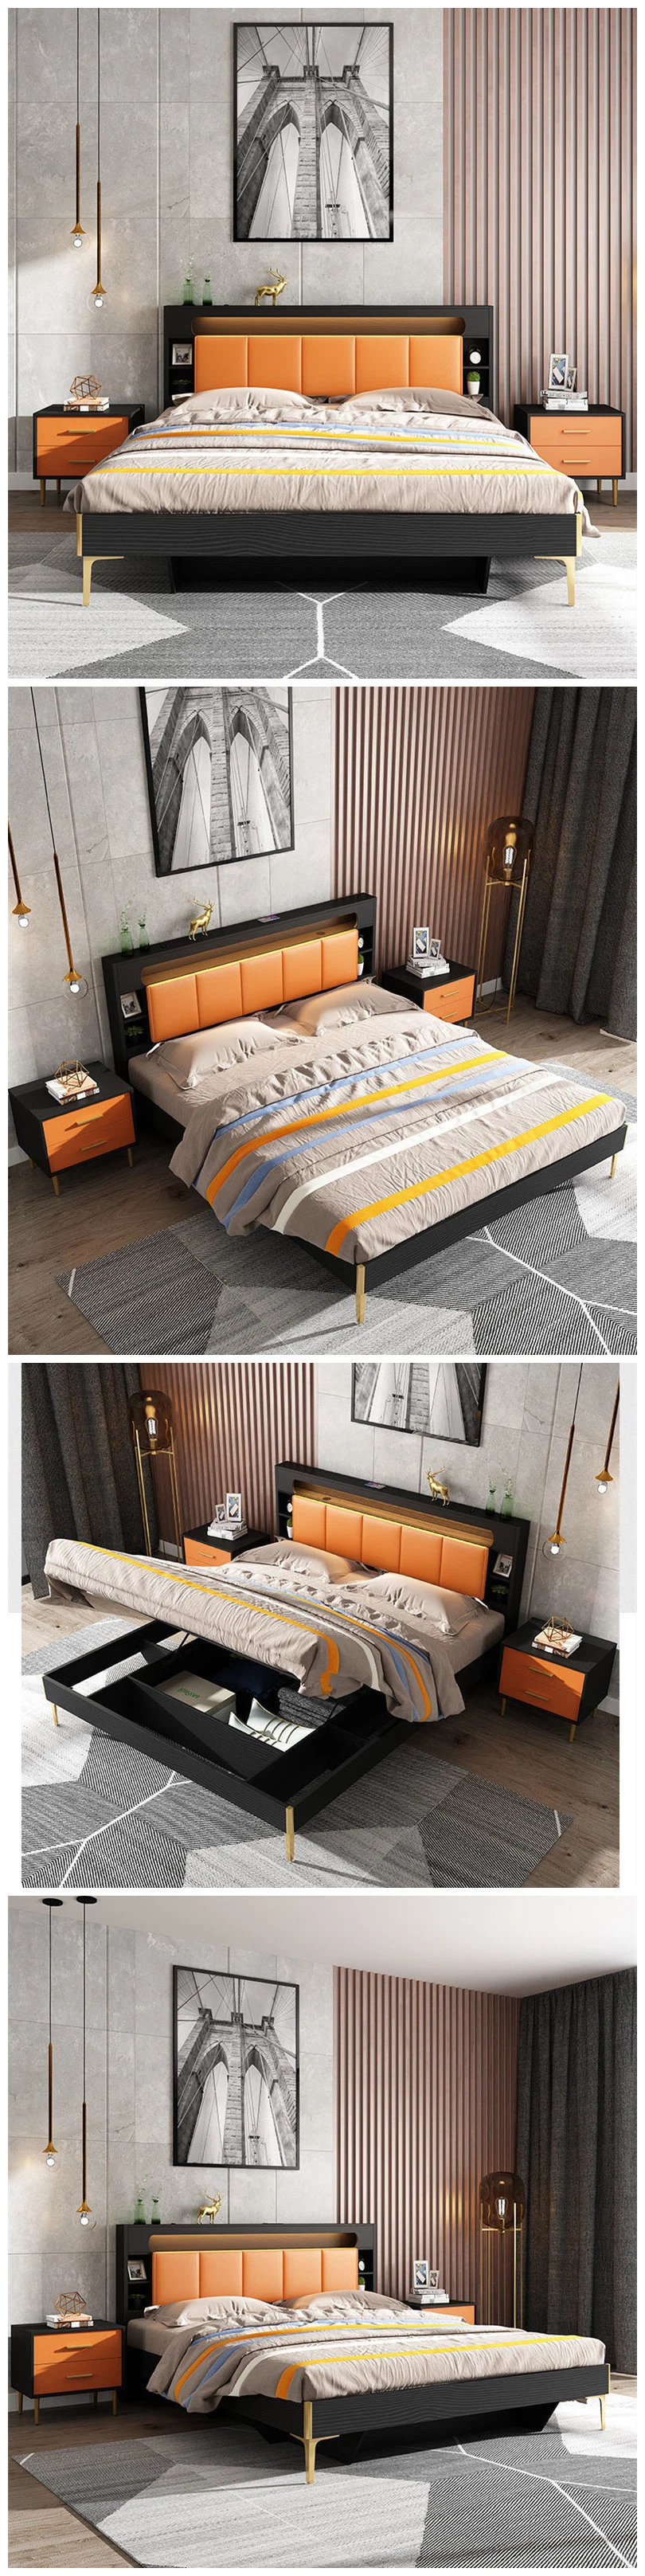 Newly Style Home Hotel Bedroom Wooden Furniture Durable Comfortable Double King Wall Bed